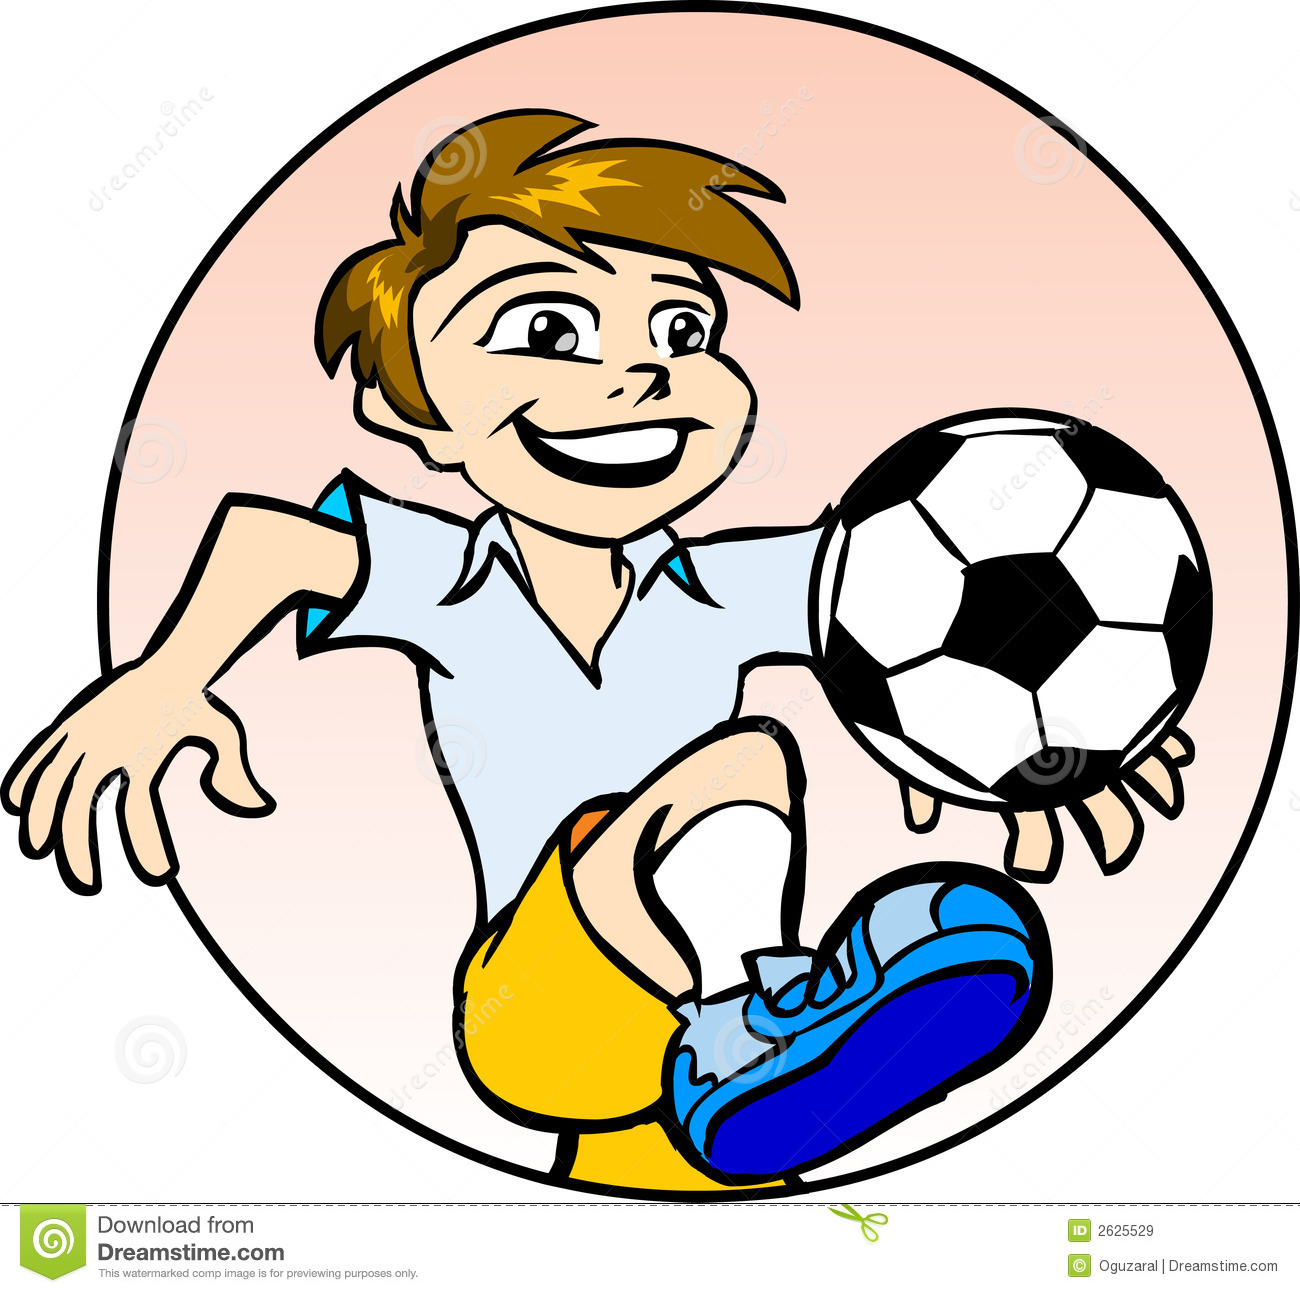 Standing Football Player Clipart   Clipart Panda   Free Clipart Images